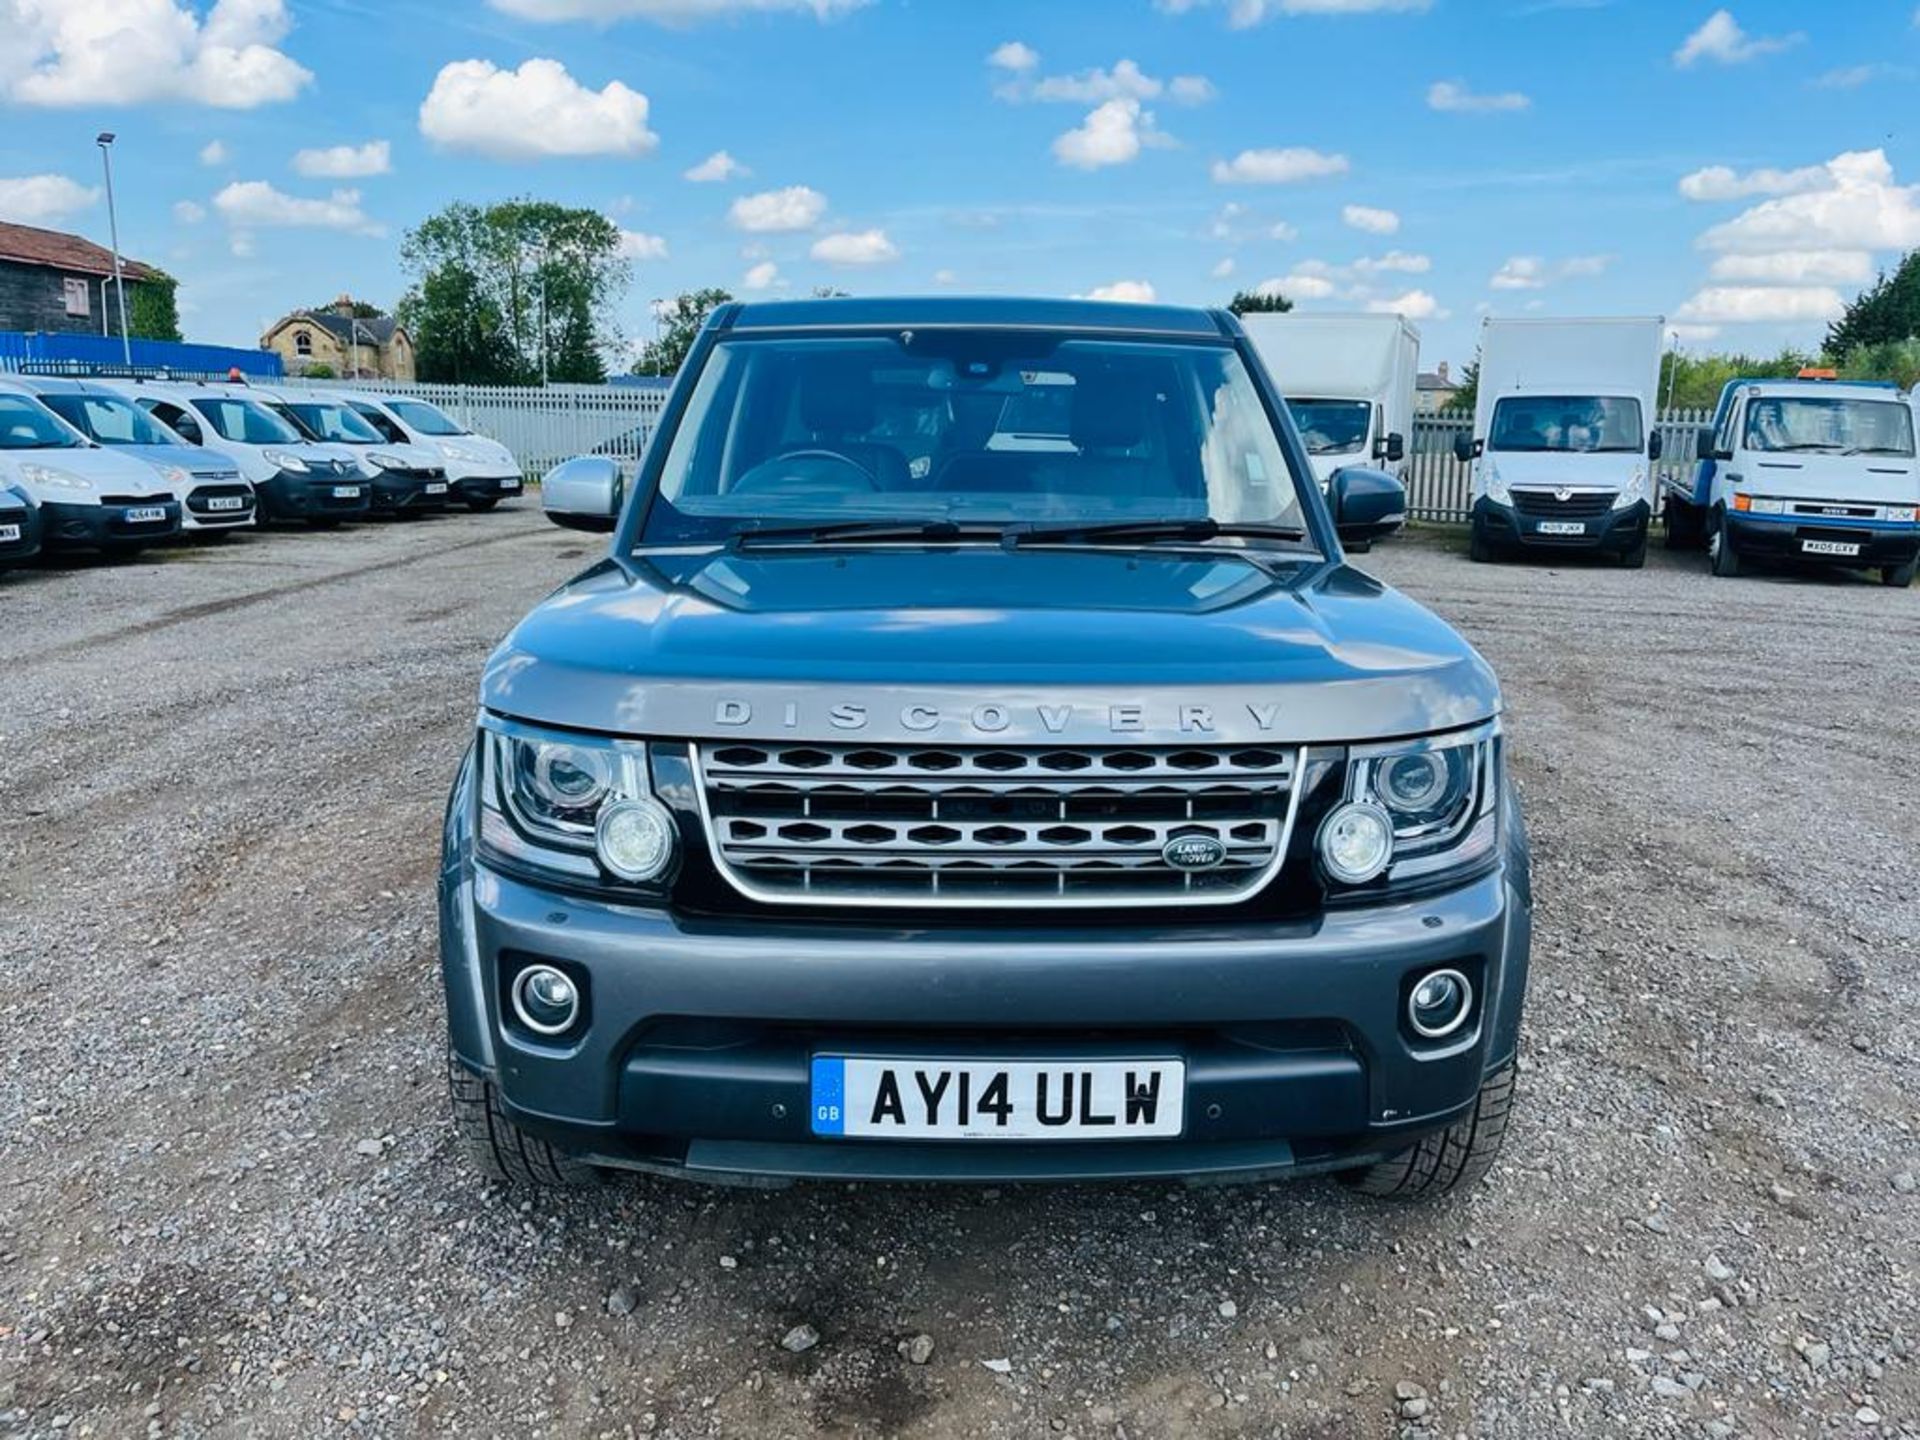 ** ON SALE ** Land Rover Discovery 4 3.0 SDV6 XS CommandShift 2014 '14 Reg' Sat Nav - A/C - 4WD - Image 2 of 26